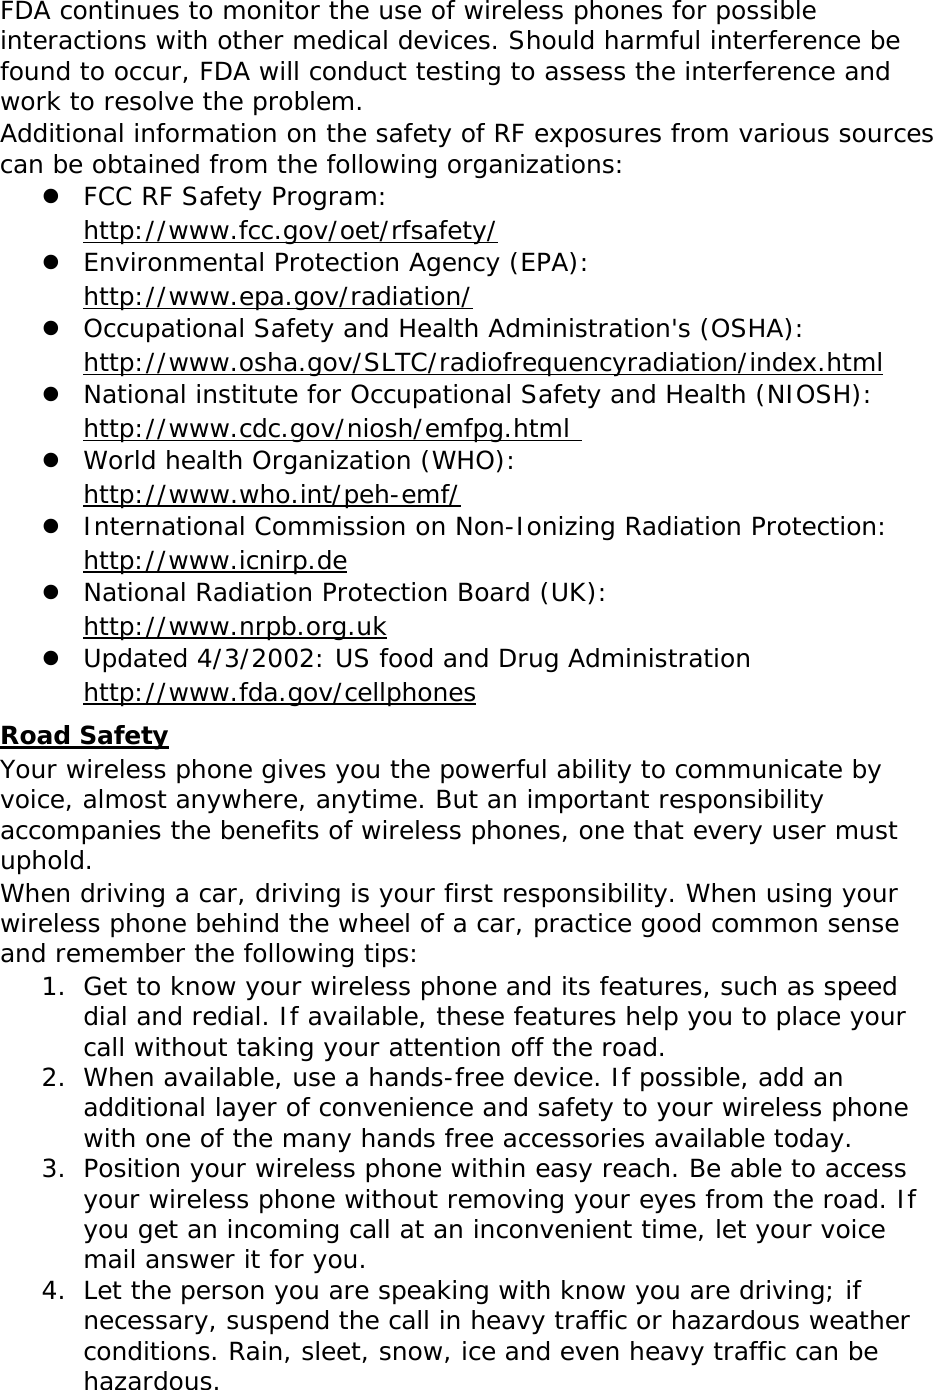 FDA continues to monitor the use of wireless phones for possible interactions with other medical devices. Should harmful interference be found to occur, FDA will conduct testing to assess the interference and work to resolve the problem. Additional information on the safety of RF exposures from various sources can be obtained from the following organizations:  FCC RF Safety Program:  http://www.fcc.gov/oet/rfsafety/  Environmental Protection Agency (EPA):  http://www.epa.gov/radiation/  Occupational Safety and Health Administration&apos;s (OSHA):        http://www.osha.gov/SLTC/radiofrequencyradiation/index.html  National institute for Occupational Safety and Health (NIOSH):  http://www.cdc.gov/niosh/emfpg.html   World health Organization (WHO):  http://www.who.int/peh-emf/  International Commission on Non-Ionizing Radiation Protection:  http://www.icnirp.de  National Radiation Protection Board (UK):  http://www.nrpb.org.uk  Updated 4/3/2002: US food and Drug Administration  http://www.fda.gov/cellphones Road Safety Your wireless phone gives you the powerful ability to communicate by voice, almost anywhere, anytime. But an important responsibility accompanies the benefits of wireless phones, one that every user must uphold. When driving a car, driving is your first responsibility. When using your wireless phone behind the wheel of a car, practice good common sense and remember the following tips: 1. Get to know your wireless phone and its features, such as speed dial and redial. If available, these features help you to place your call without taking your attention off the road. 2. When available, use a hands-free device. If possible, add an additional layer of convenience and safety to your wireless phone with one of the many hands free accessories available today. 3. Position your wireless phone within easy reach. Be able to access your wireless phone without removing your eyes from the road. If you get an incoming call at an inconvenient time, let your voice mail answer it for you. 4. Let the person you are speaking with know you are driving; if necessary, suspend the call in heavy traffic or hazardous weather conditions. Rain, sleet, snow, ice and even heavy traffic can be hazardous. 